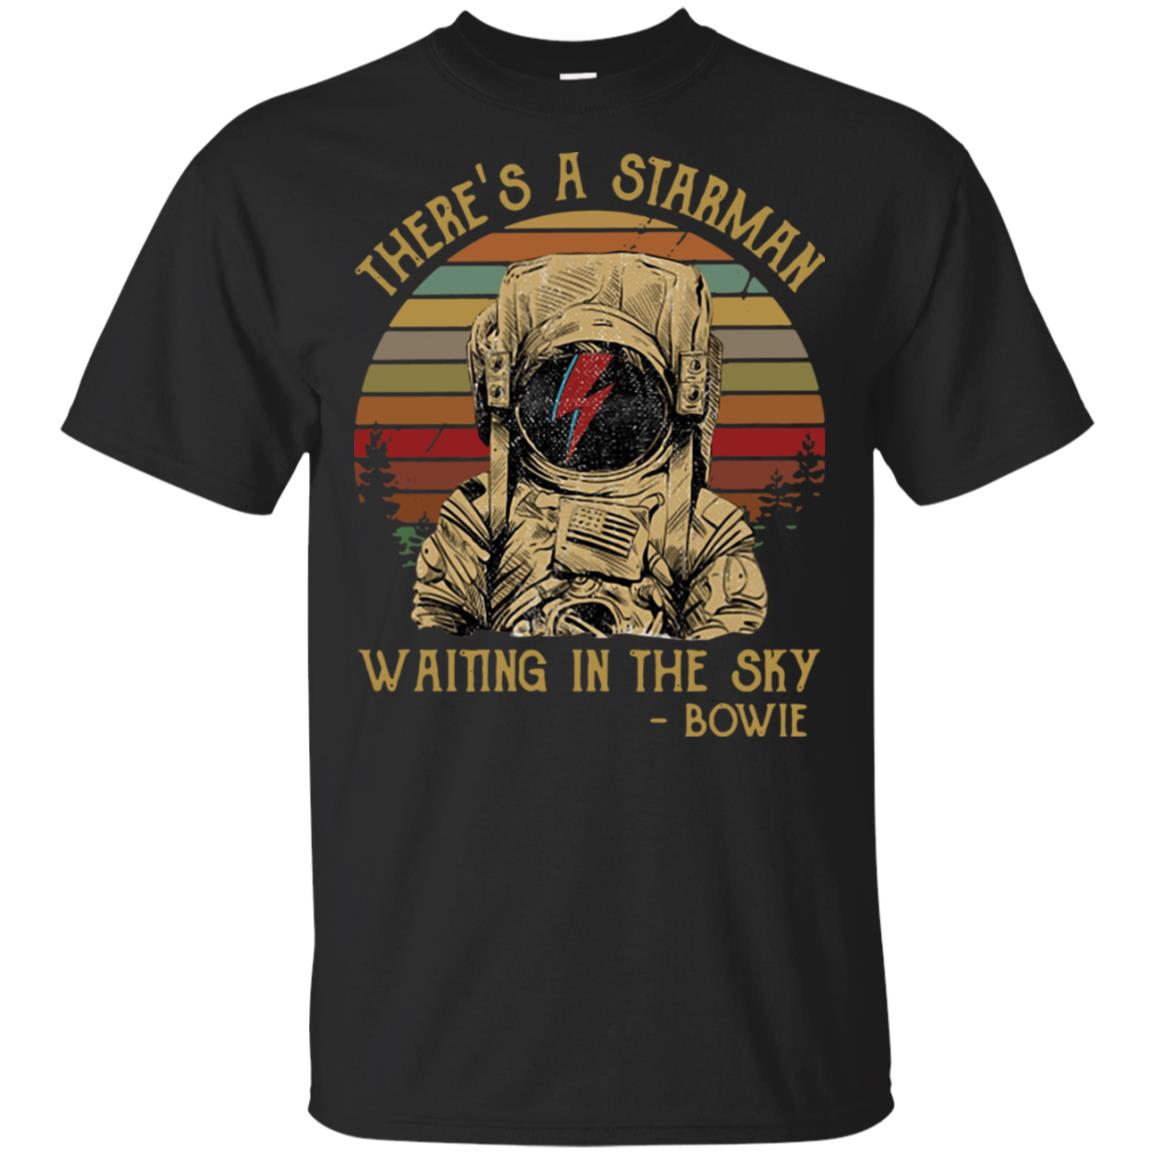 There's A Starman Waiting In The Sky Bowie Vintage Men's T Shirt Black Cotton